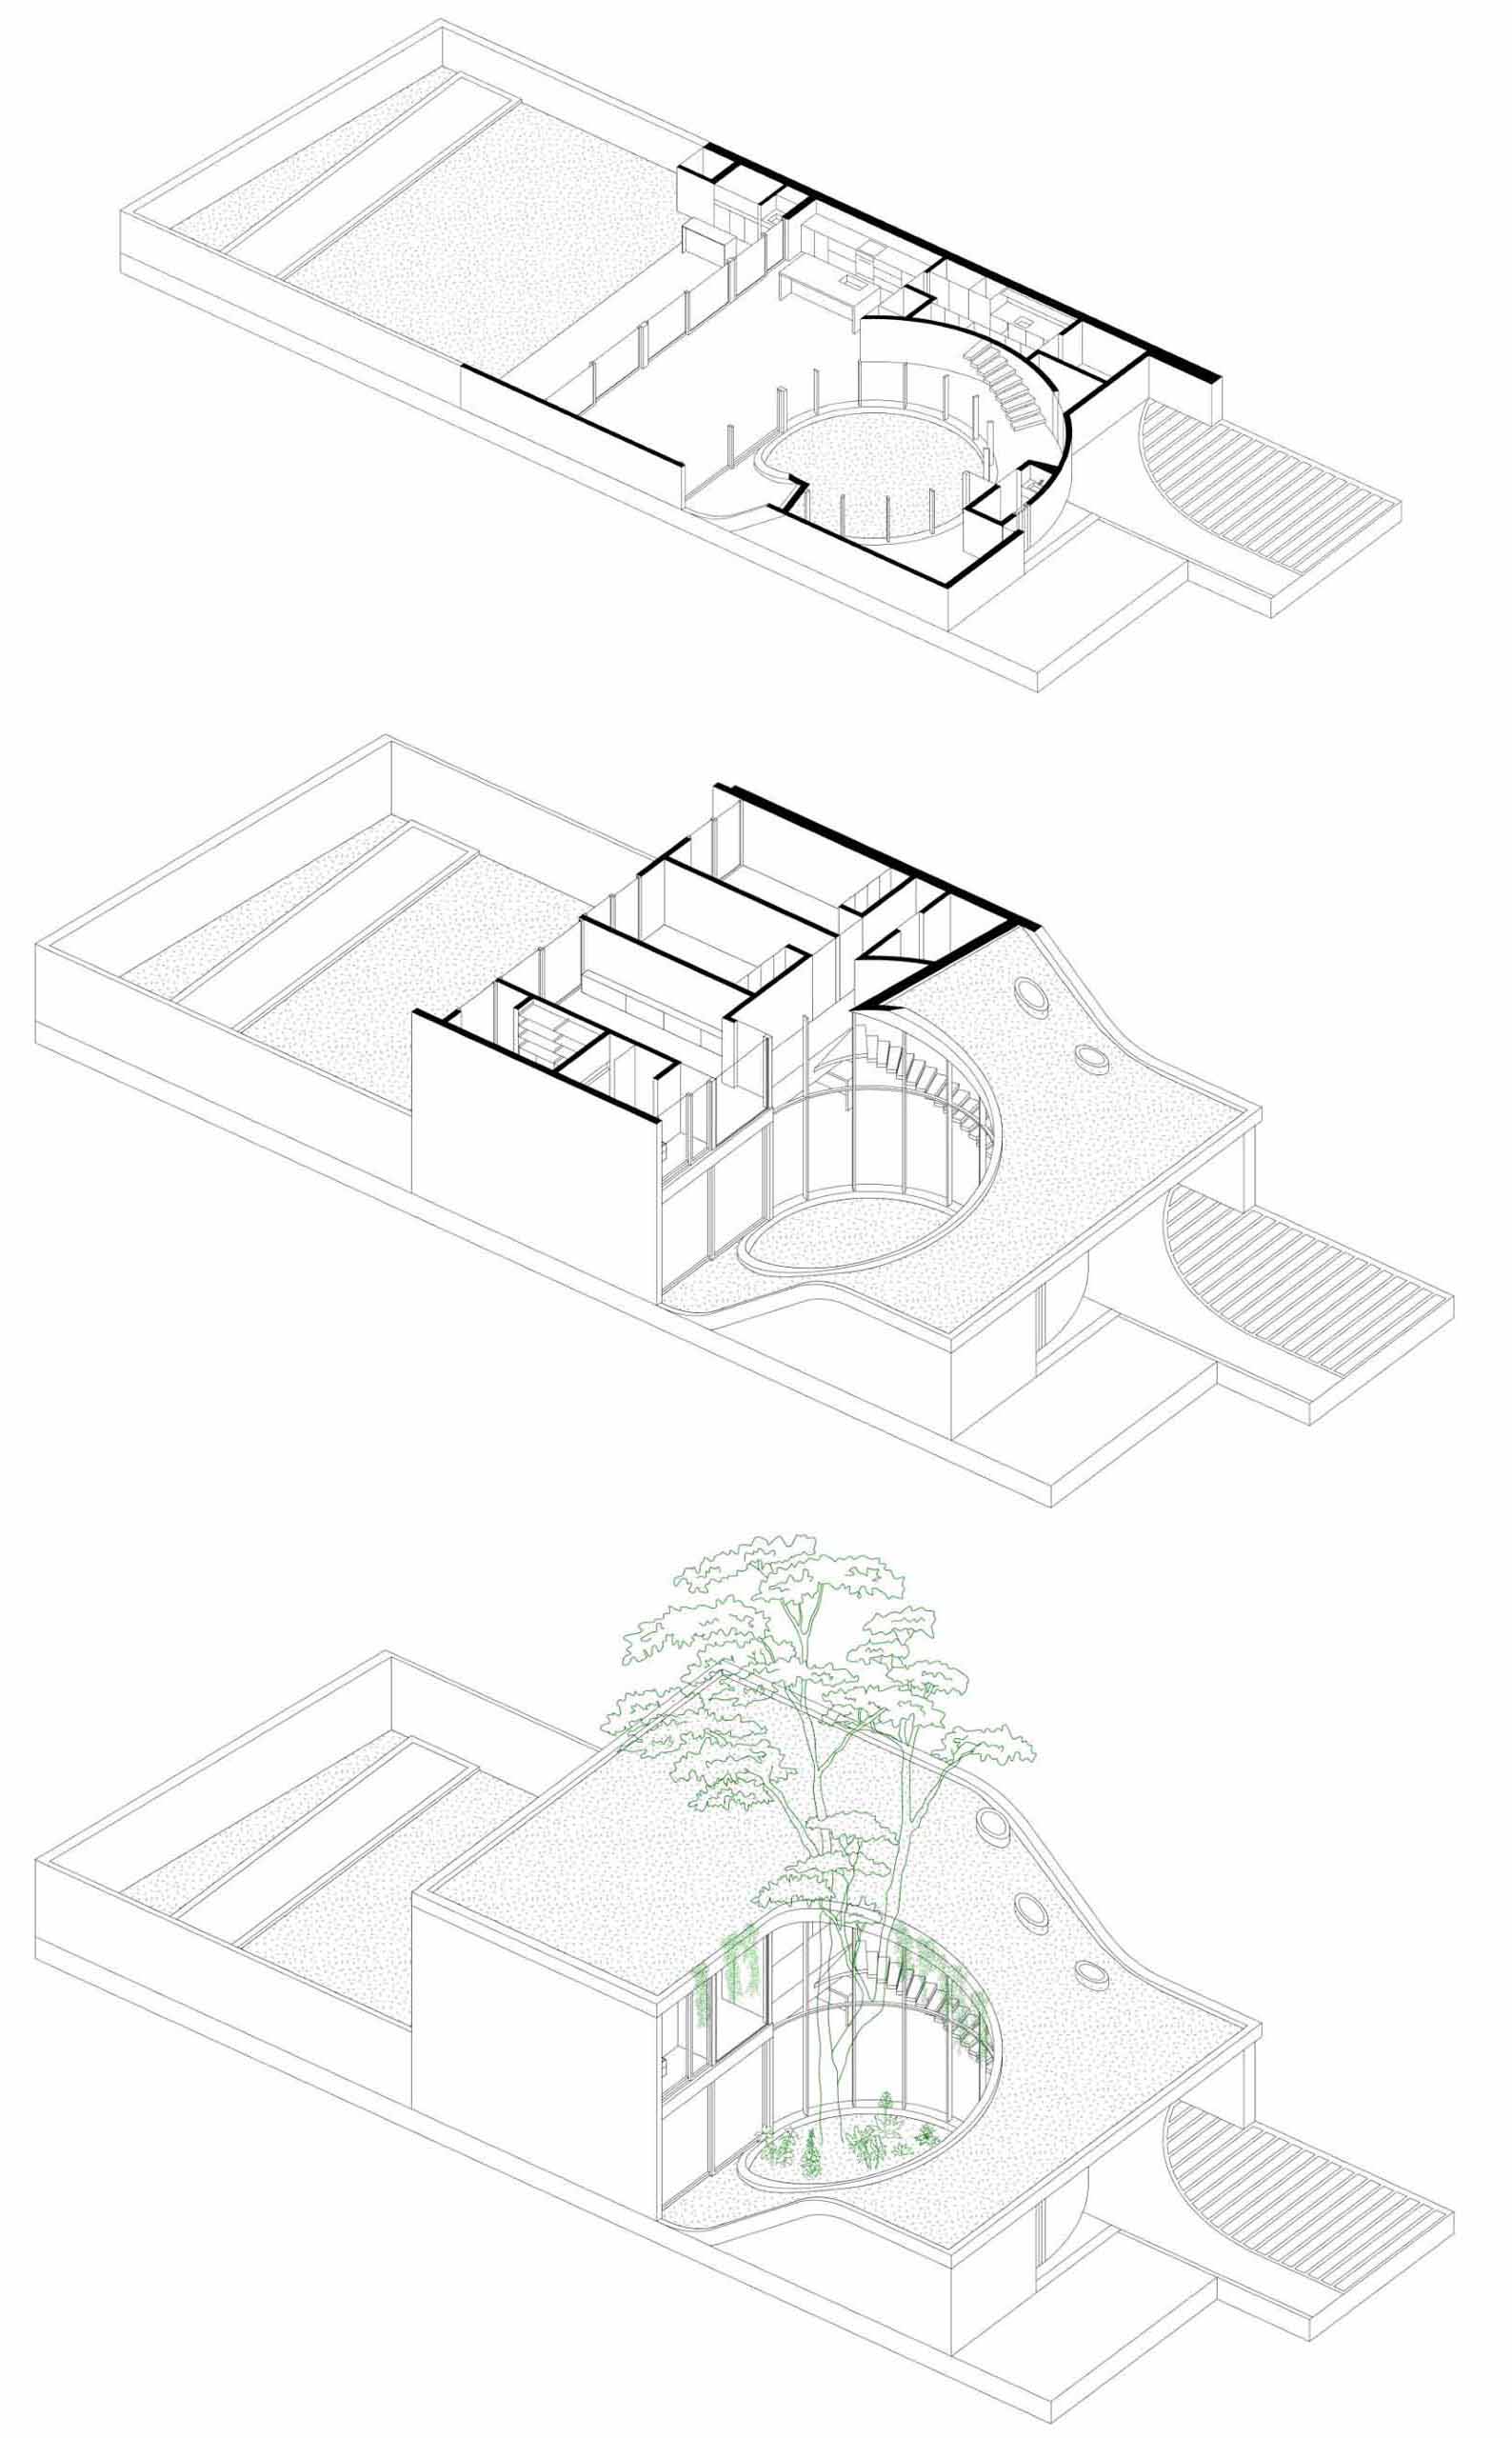 A contemporary ،me that wraps around a 100-year-old oak tree and has a green roof.